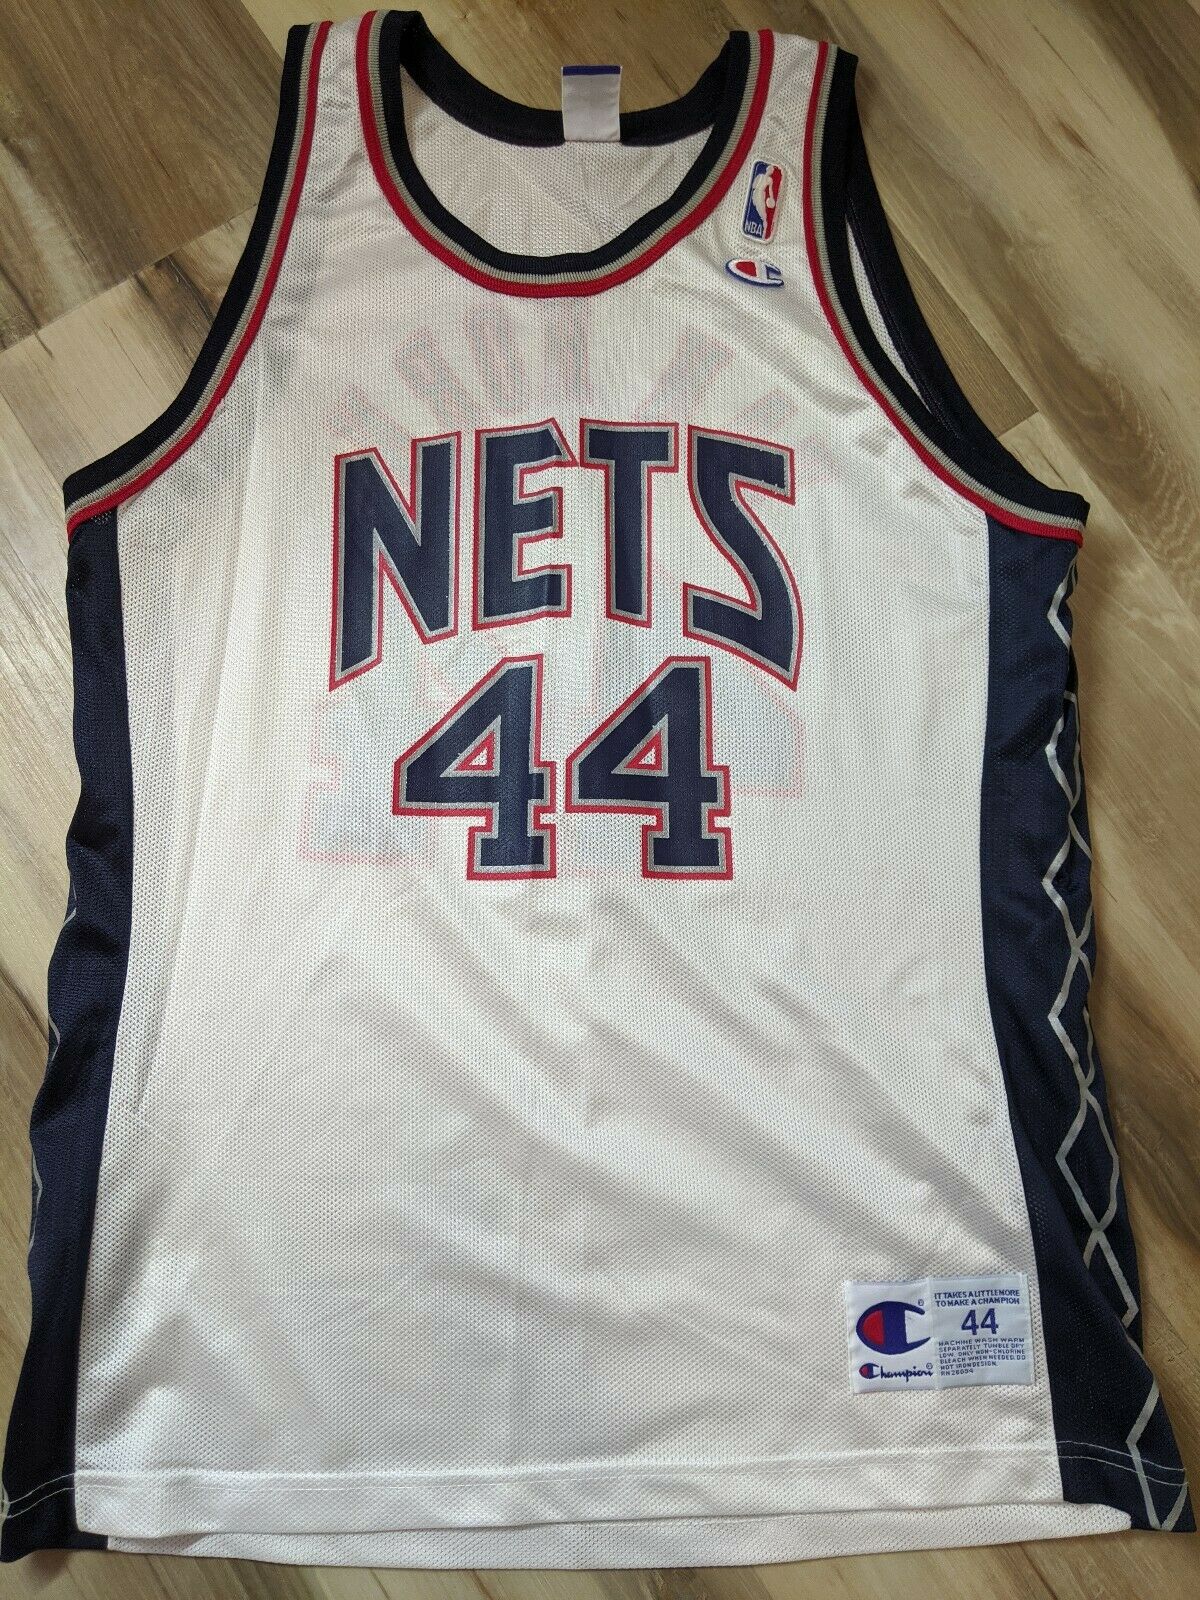 Keith Van Horn Nets Jersey sz 52/XXL New w. Tags – First Team Vintage